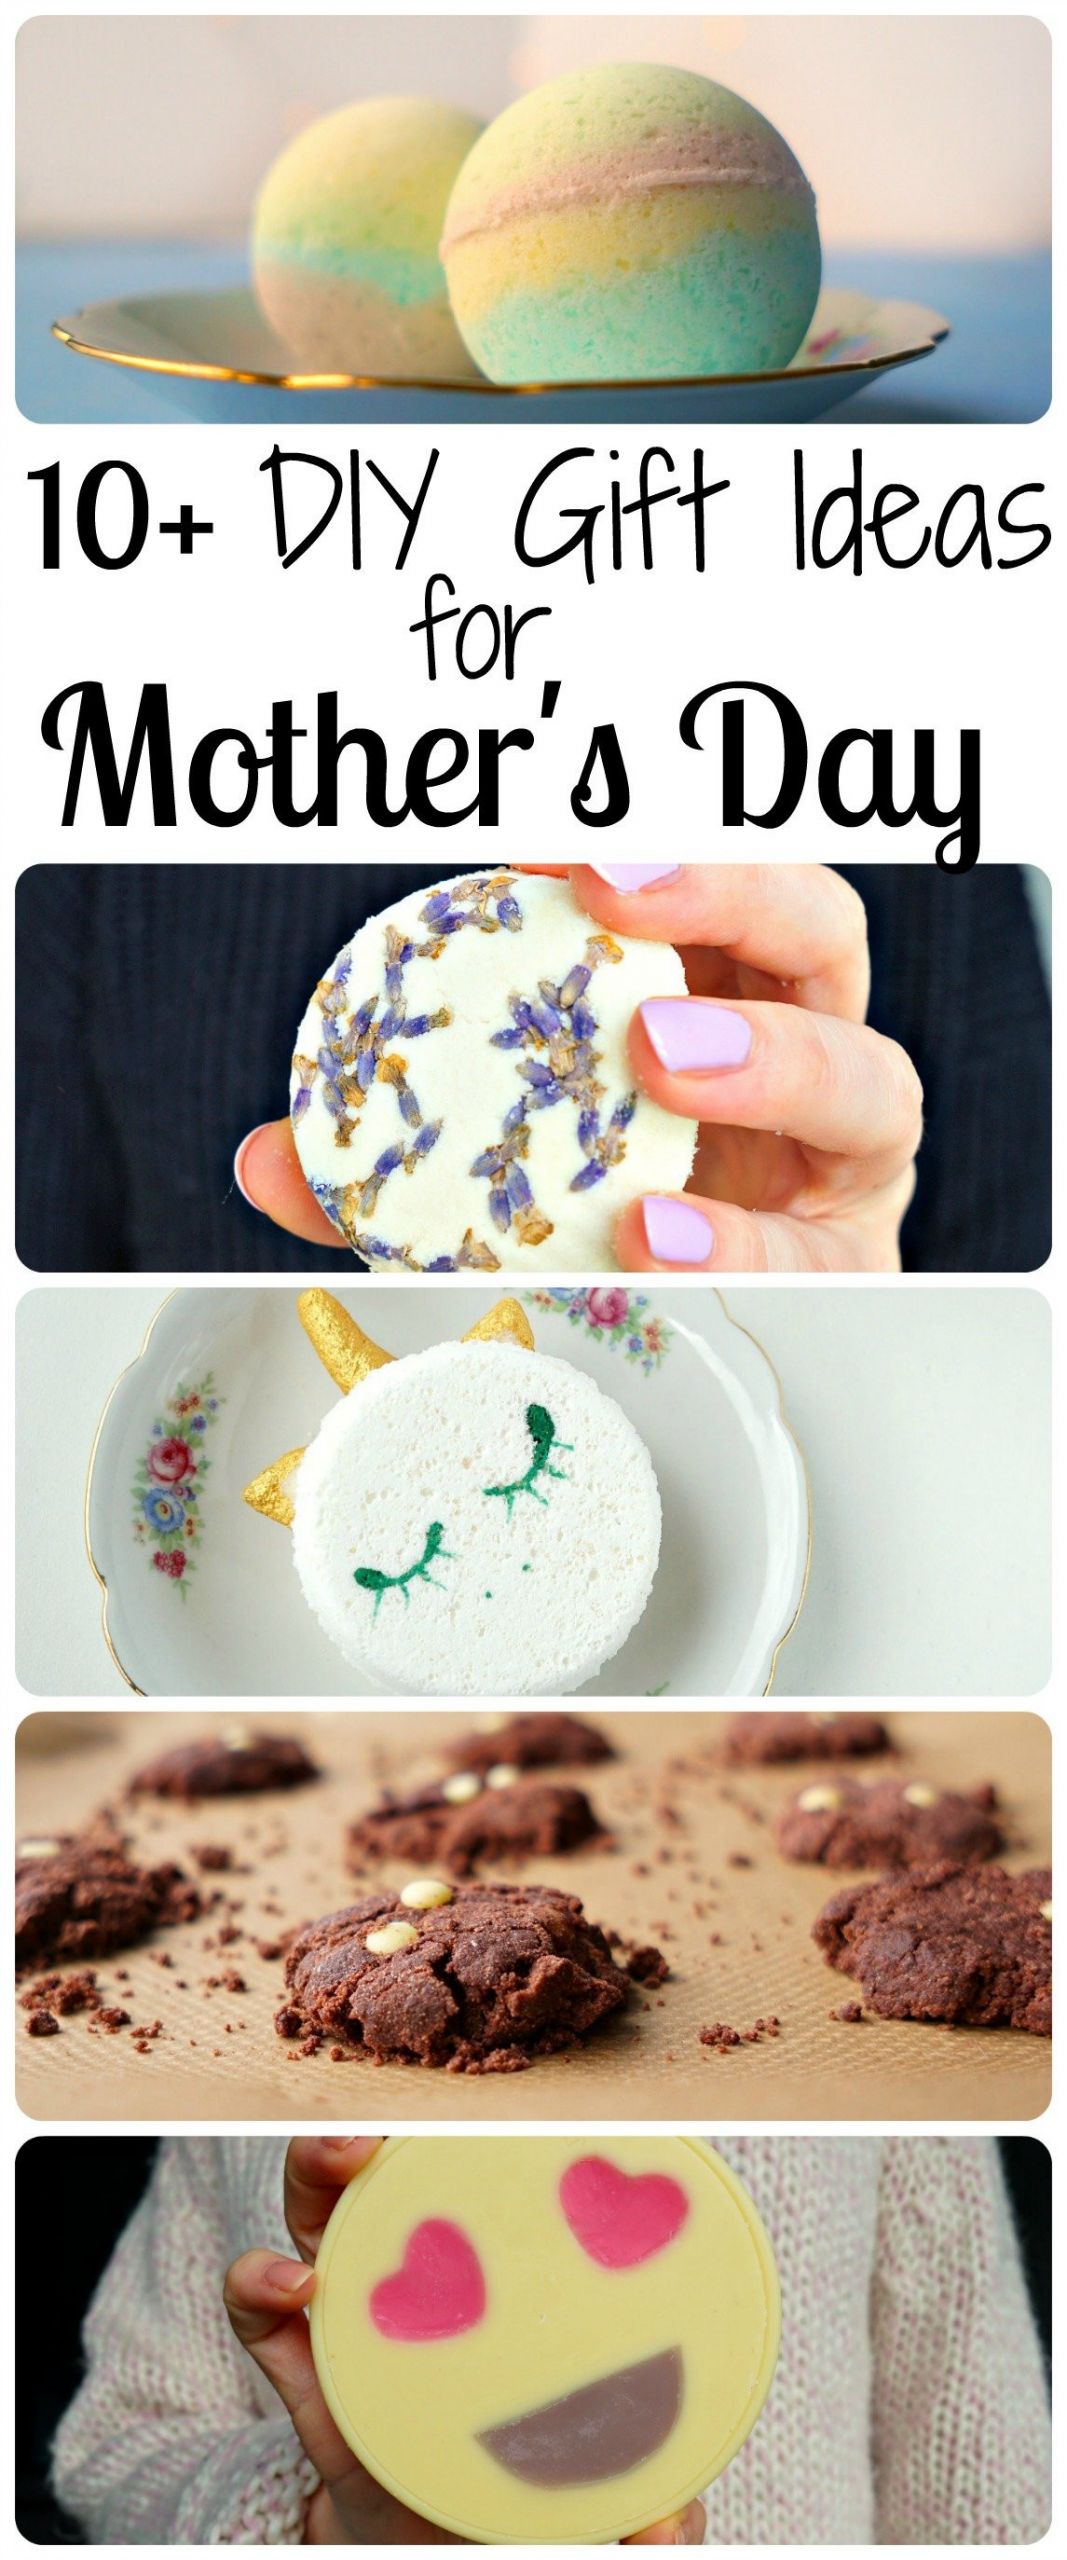 Mother'S Day Crochet Gift Ideas
 30 Gift Ideas for Mother s Day to Buy or DIY The Makeup